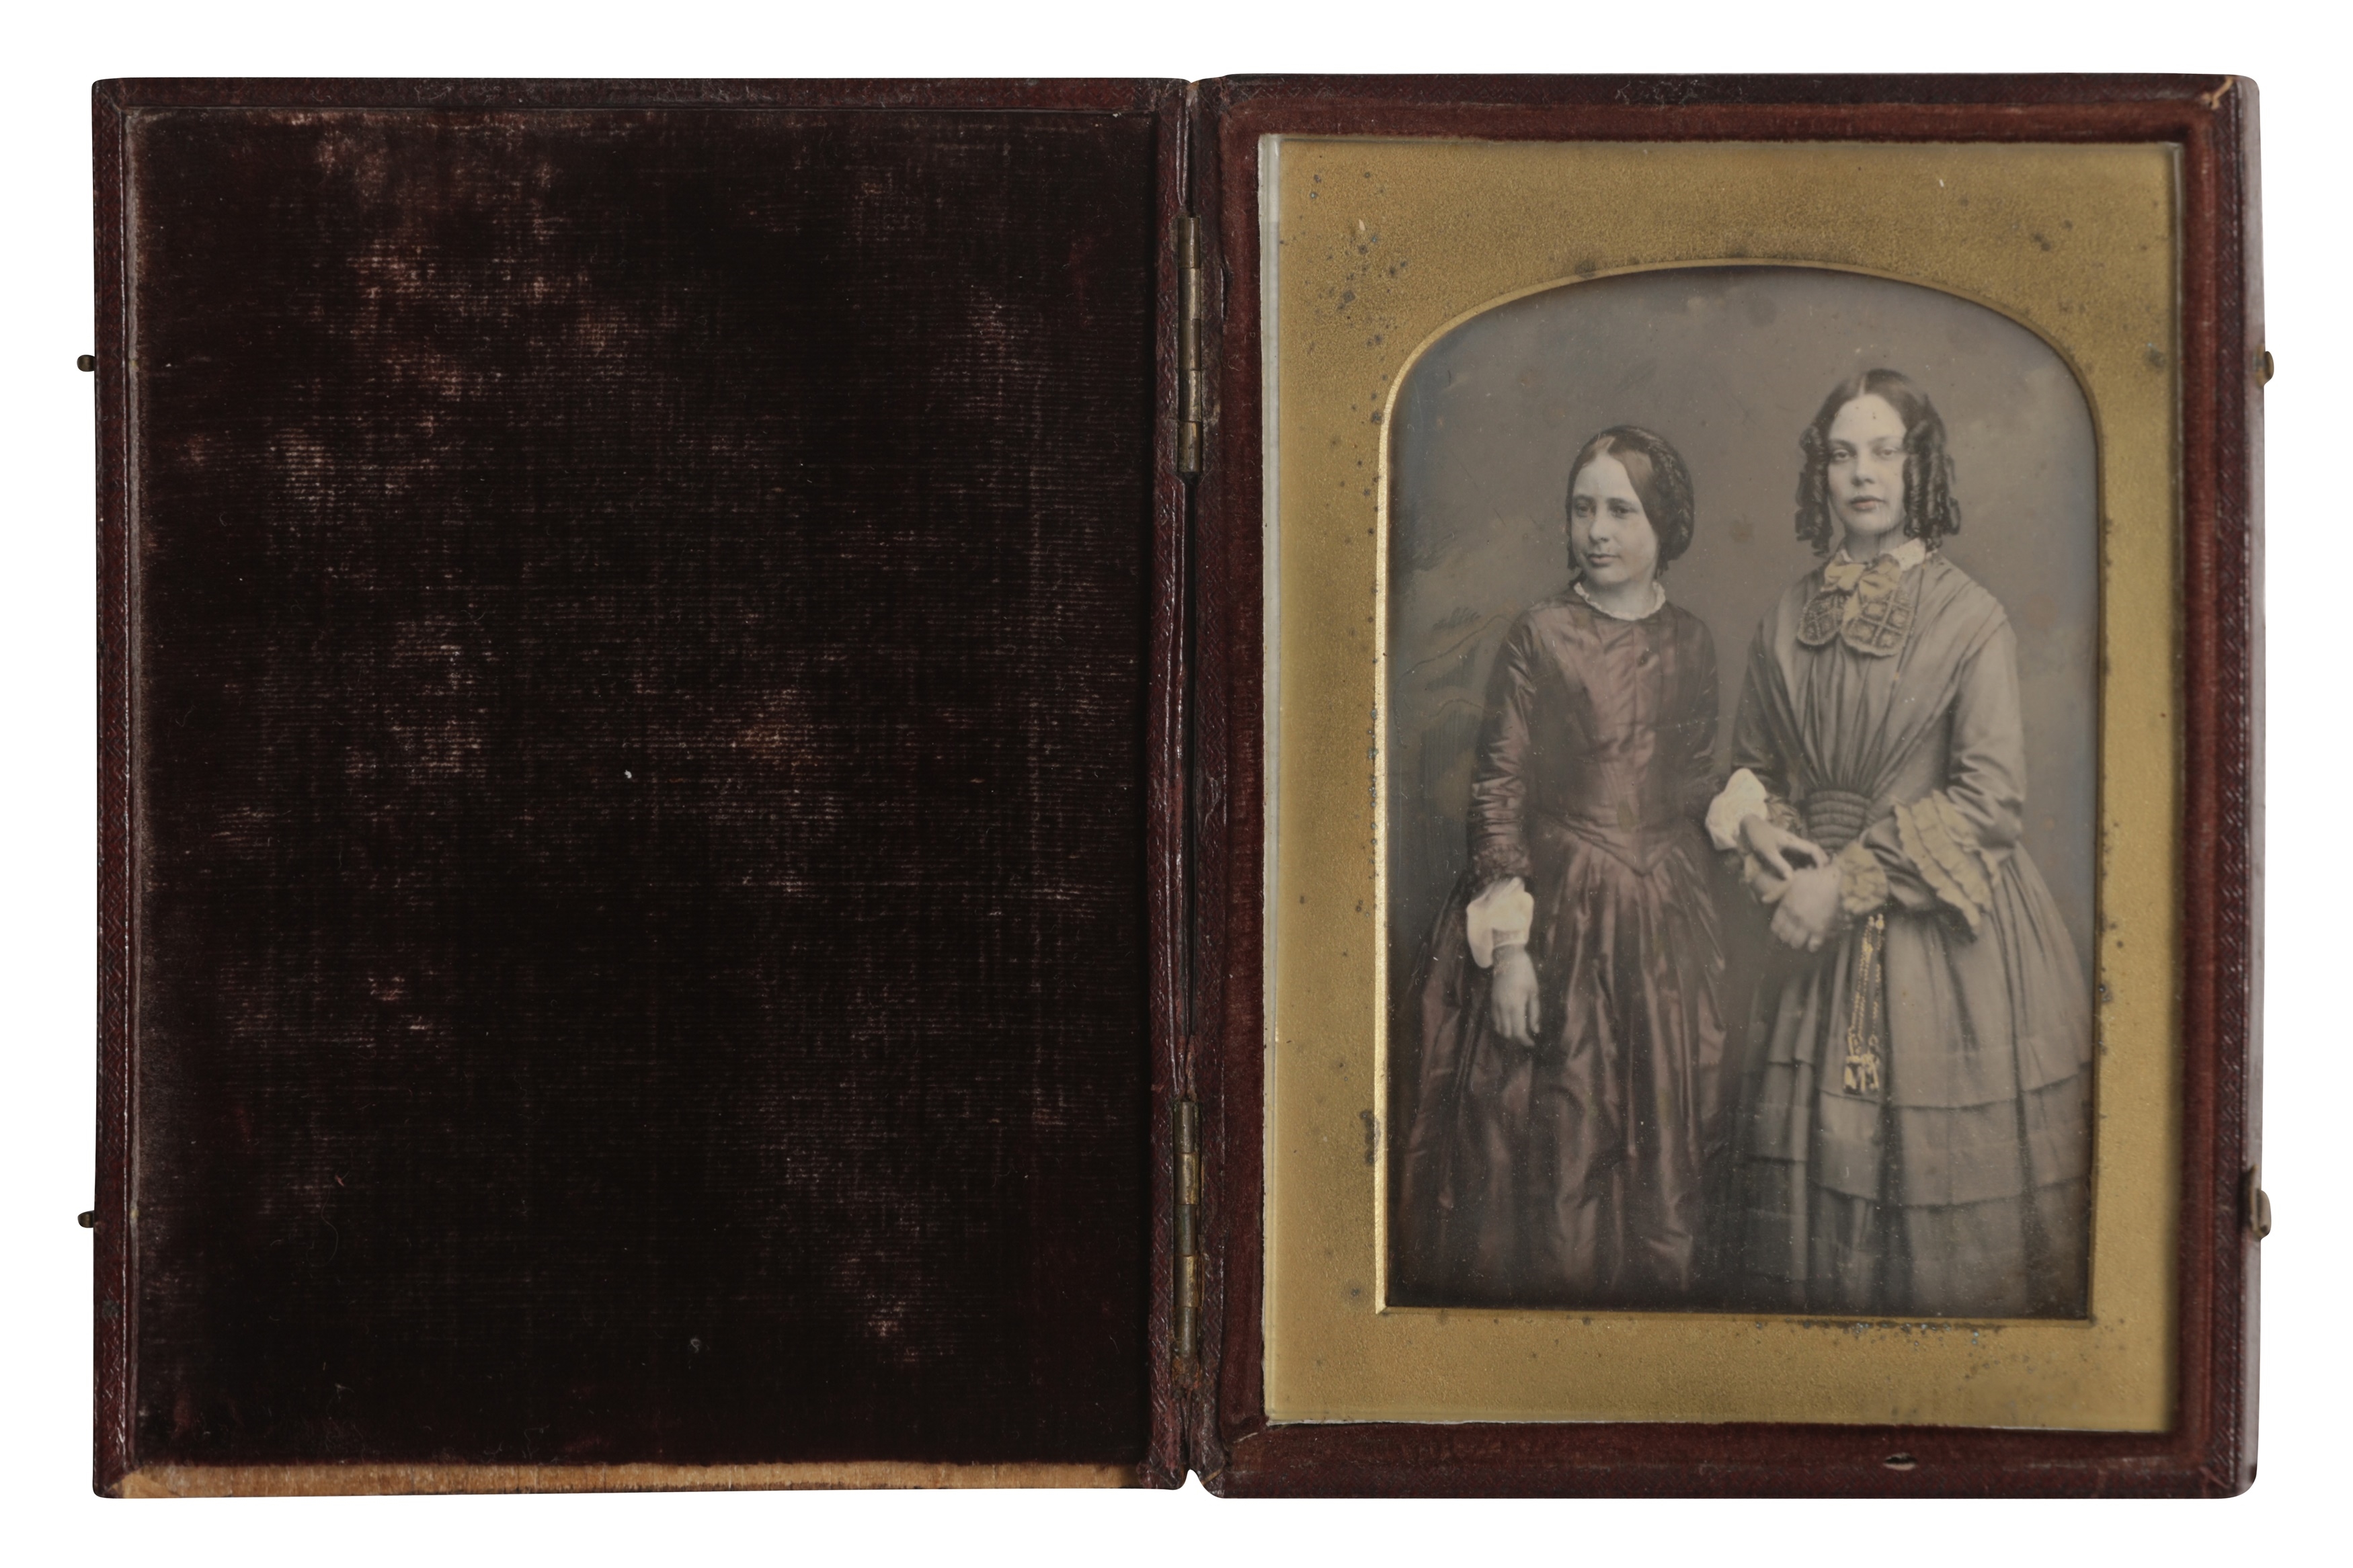 Artwork by William Edward Kilburn, A COLLECTION OF DAGUERREOTYPE PORTRAITS c.1850, Made of DAGUERREOTYPE